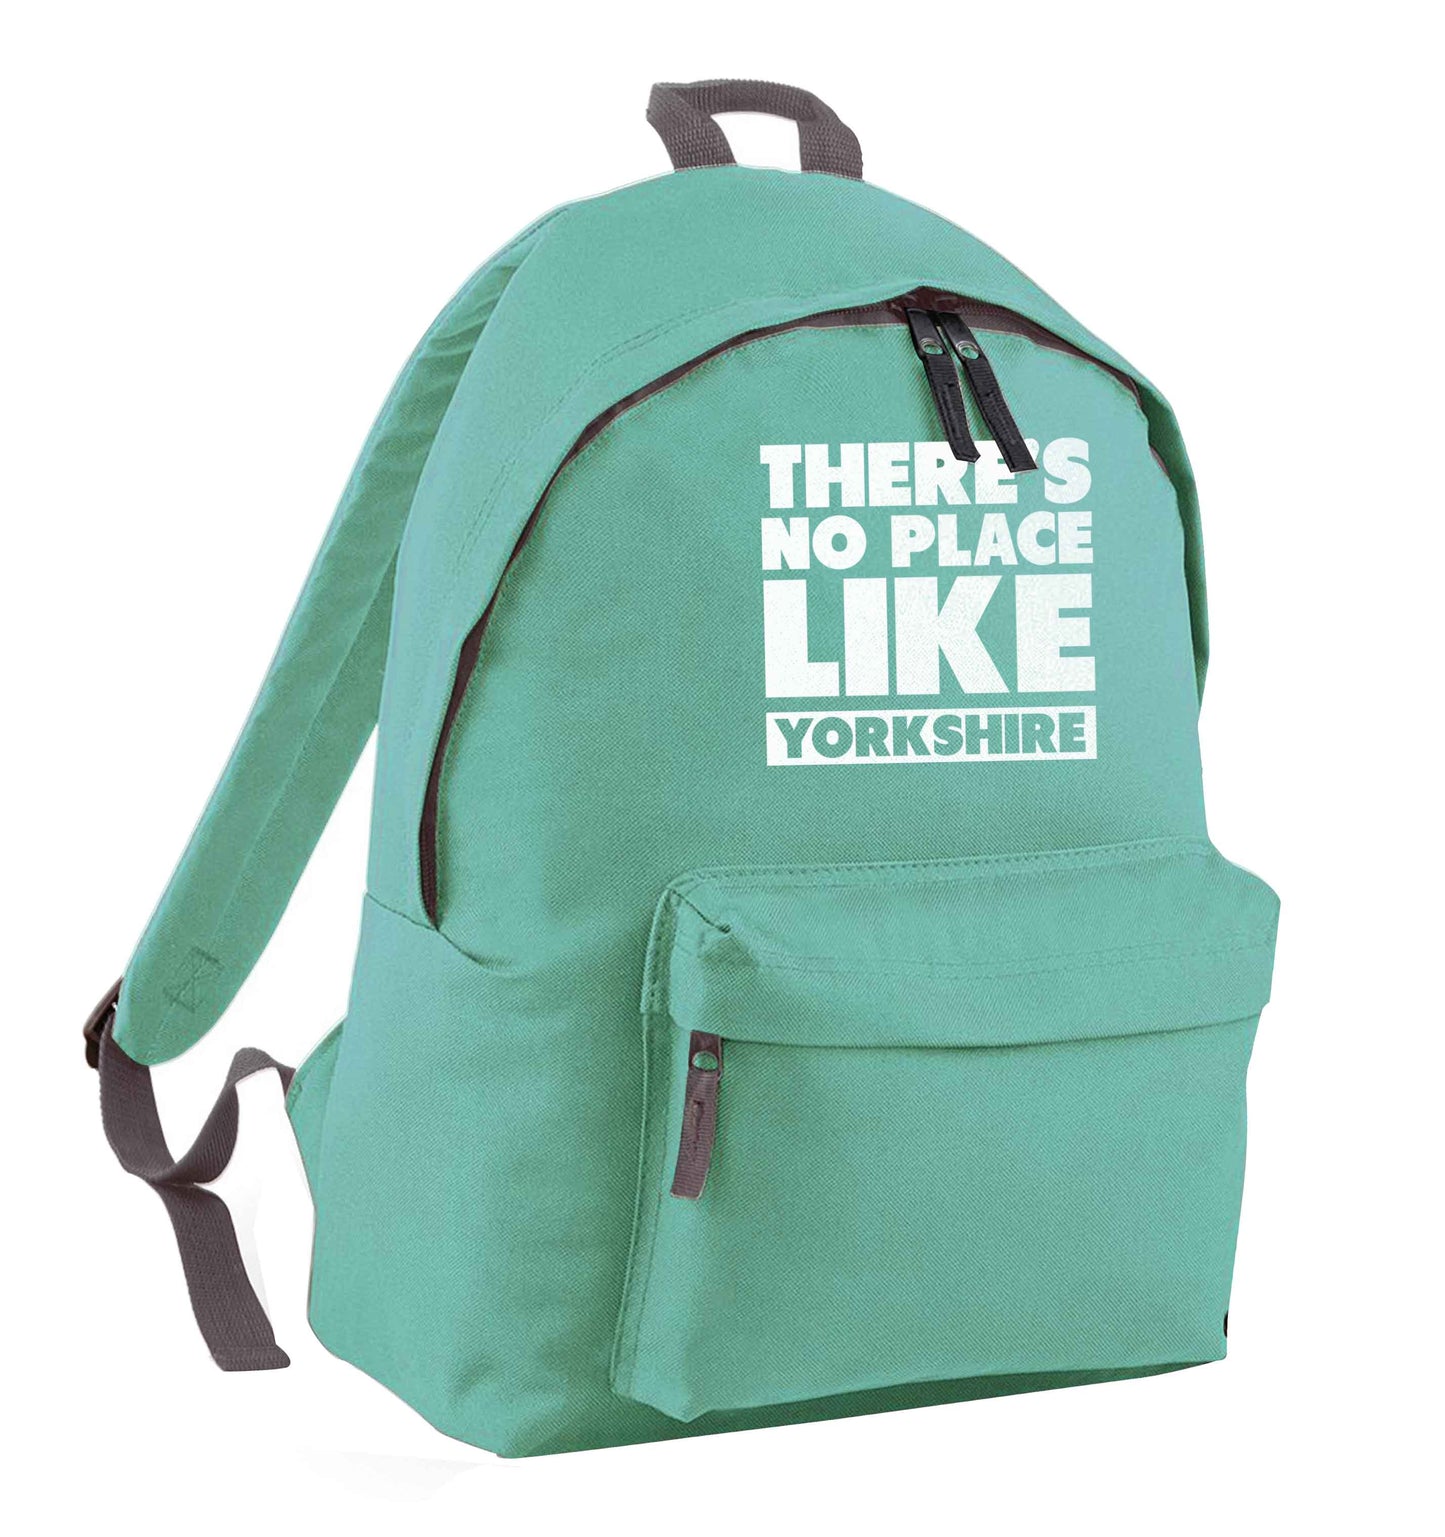 There's no place like Yorkshire mint adults backpack